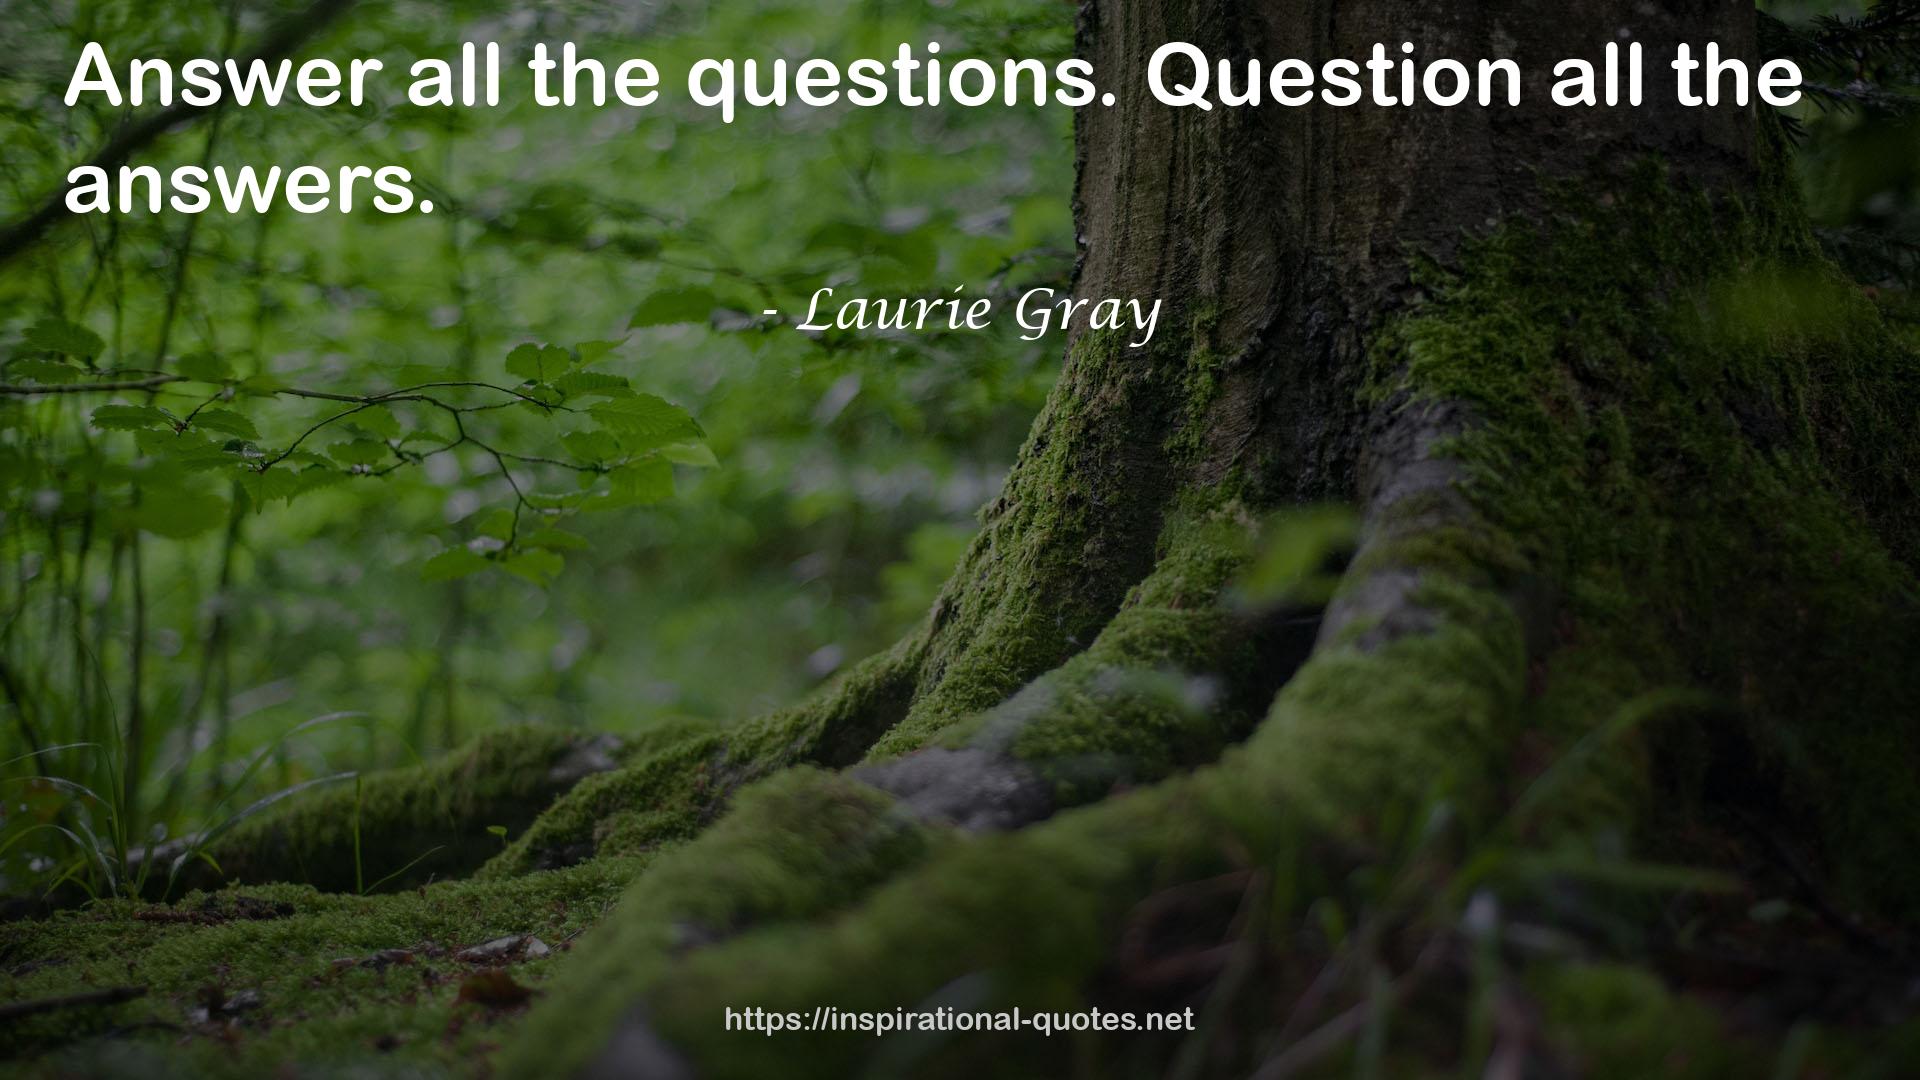 Laurie Gray QUOTES